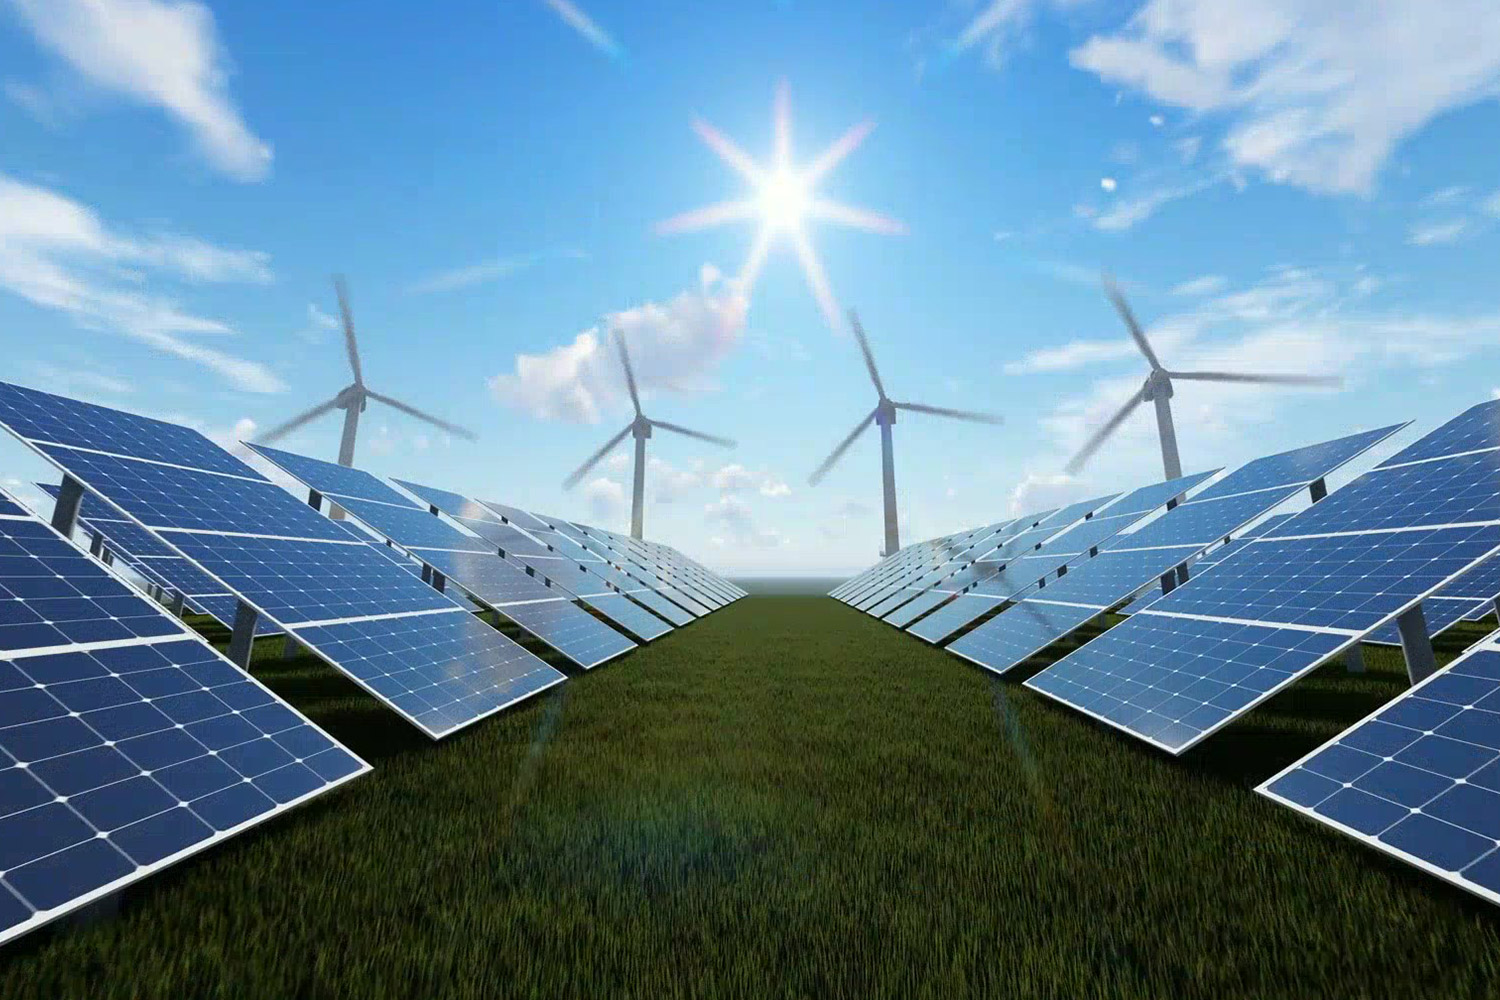 Wind and solar power have long been touted as the answer to our growing energy needs